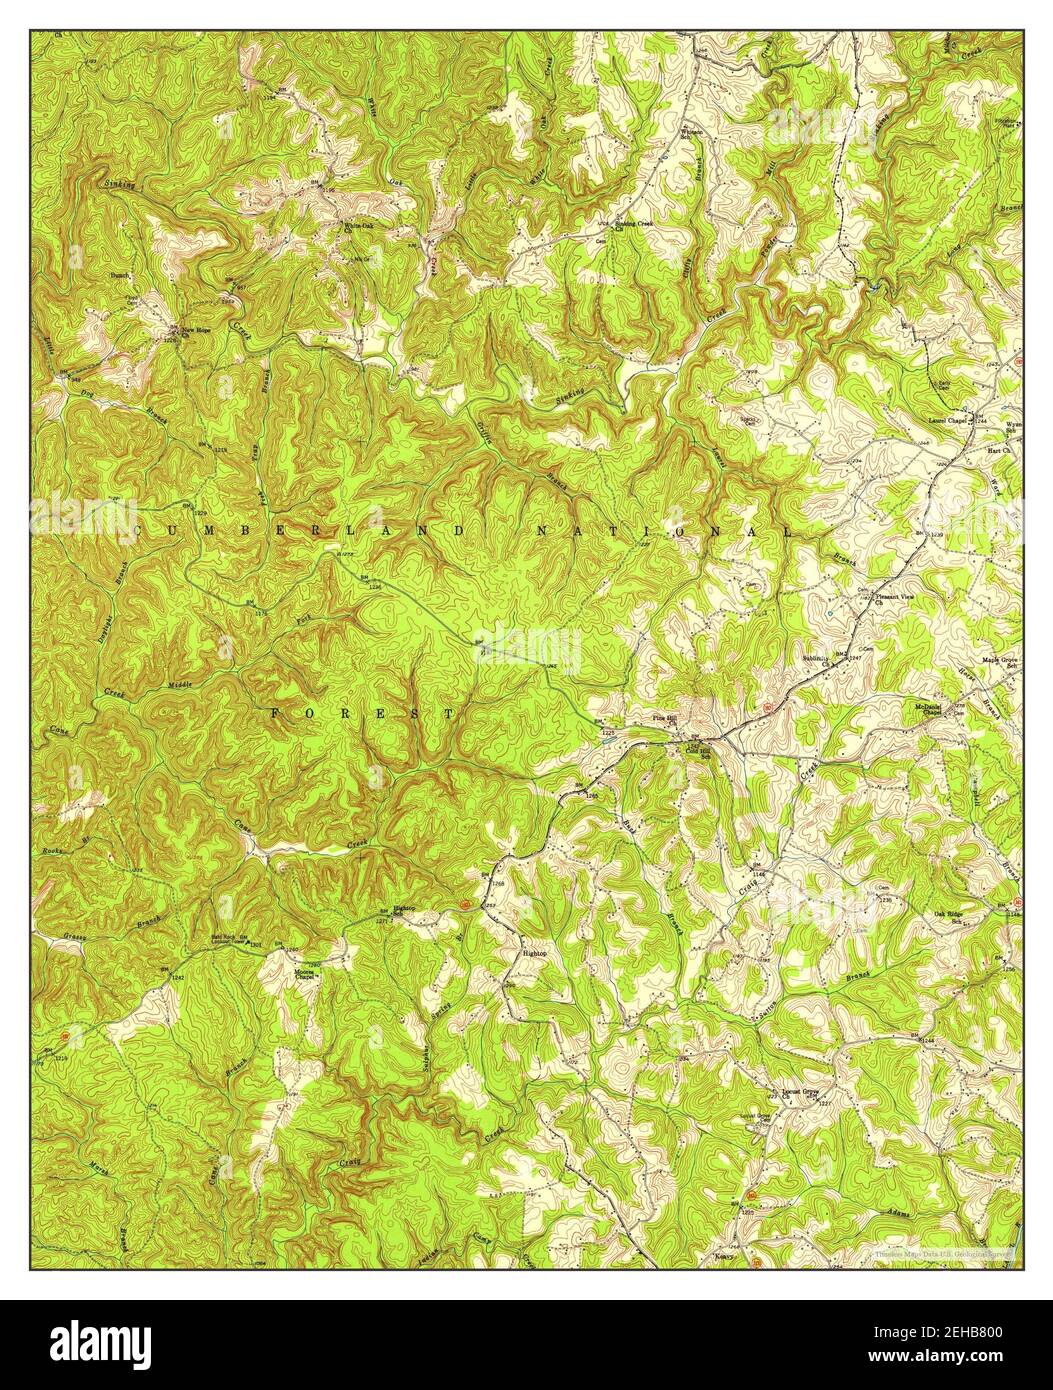 London SW, Kentucky, map 1952, 1:24000, United States of America by Timeless Maps, data U.S. Geological Survey Stock Photo